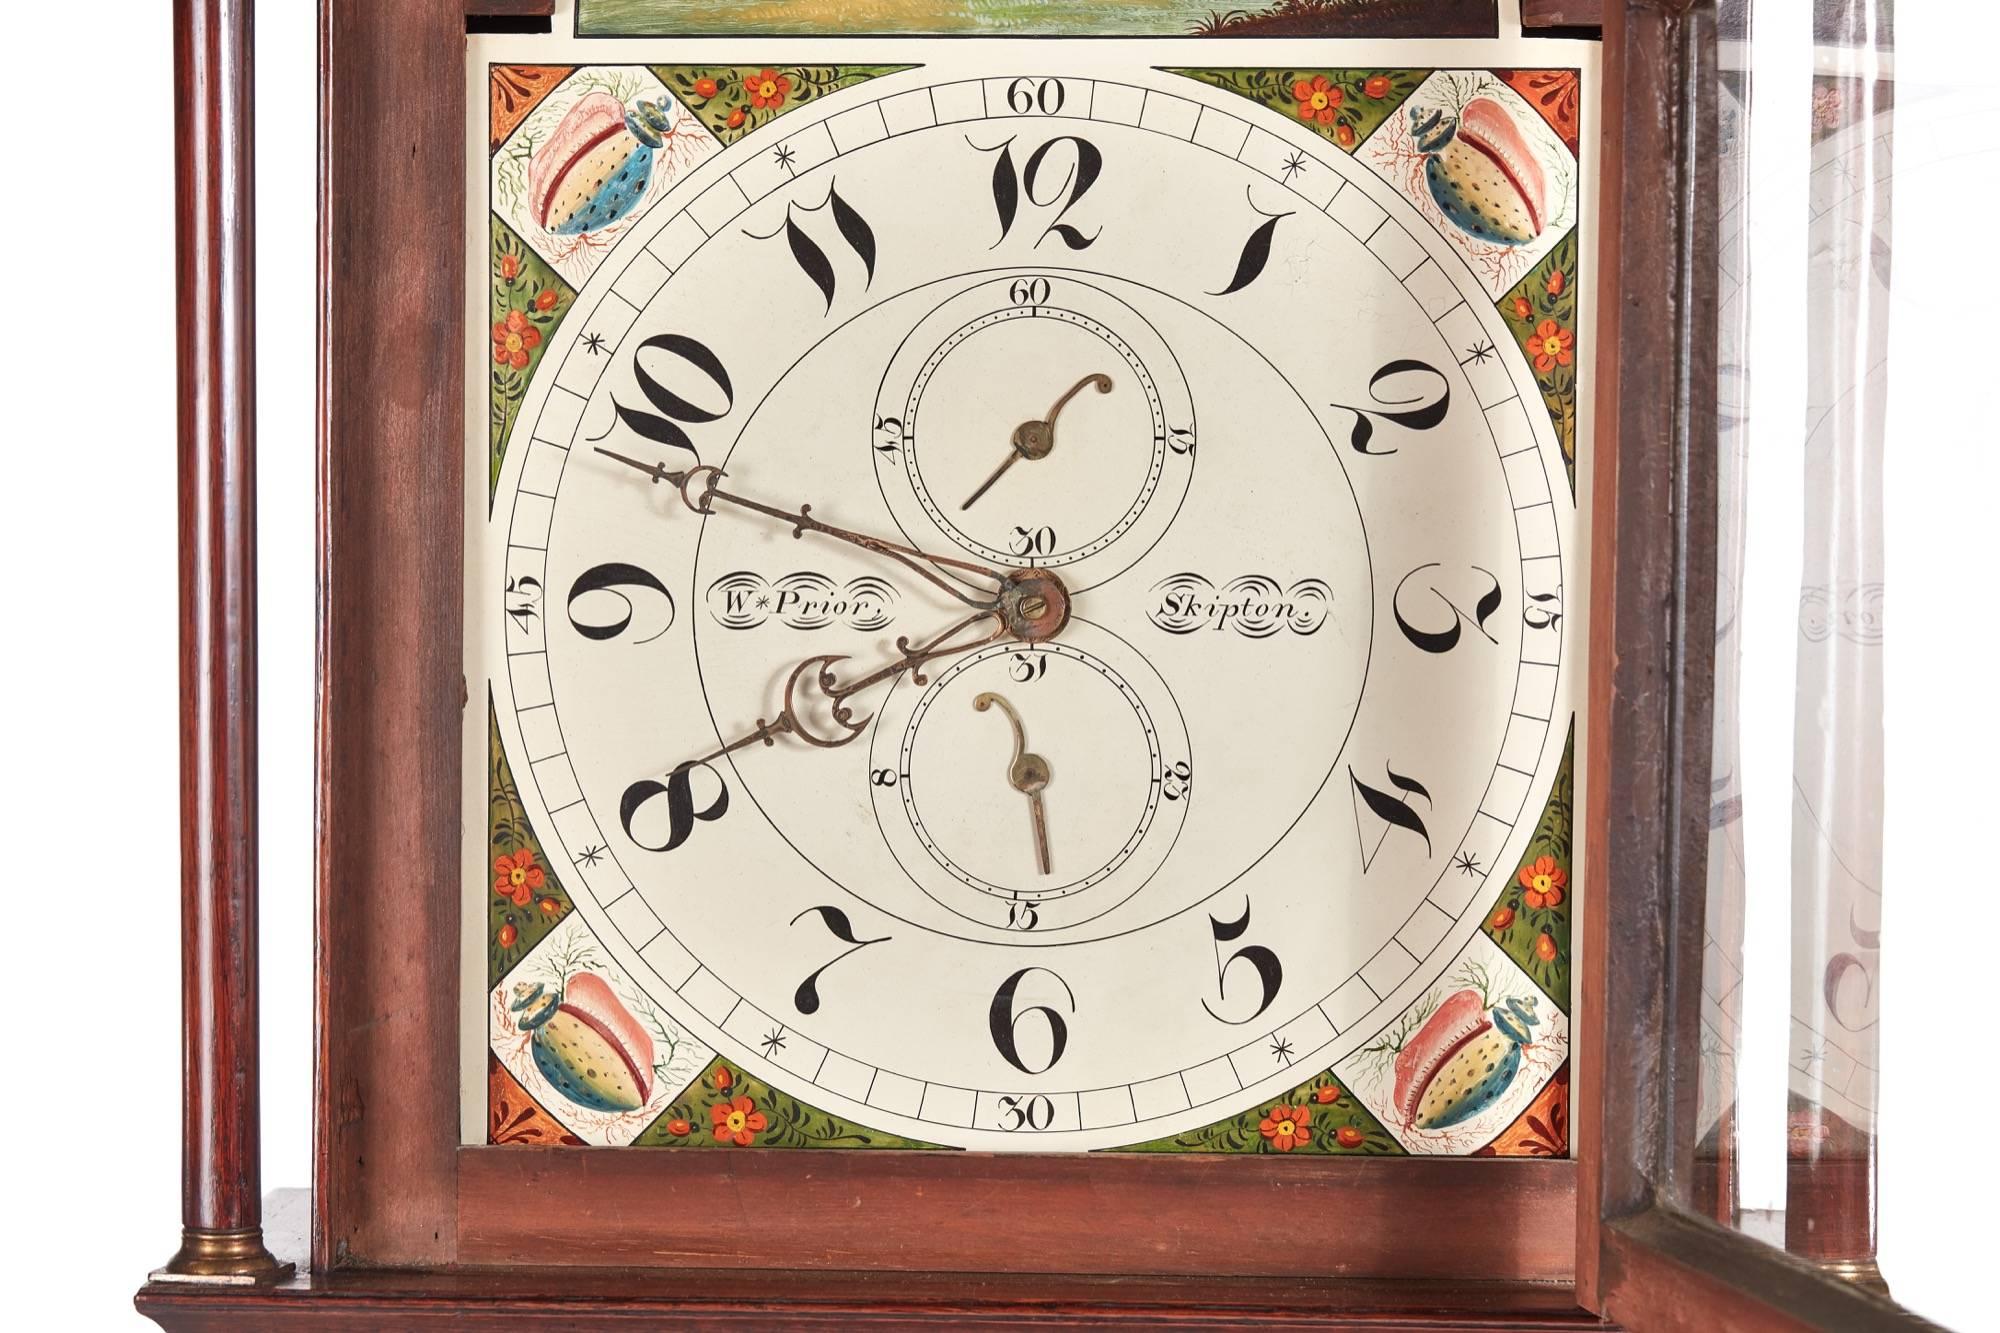 Antique oak and mahogany grandfather clock by W Prior Skipton, with a swan-neck pediment, lovely decorative arced painted dial with date and seconds dial, 30 hour movement striking the hour on a bell, lovely oak and mahogany case standing on